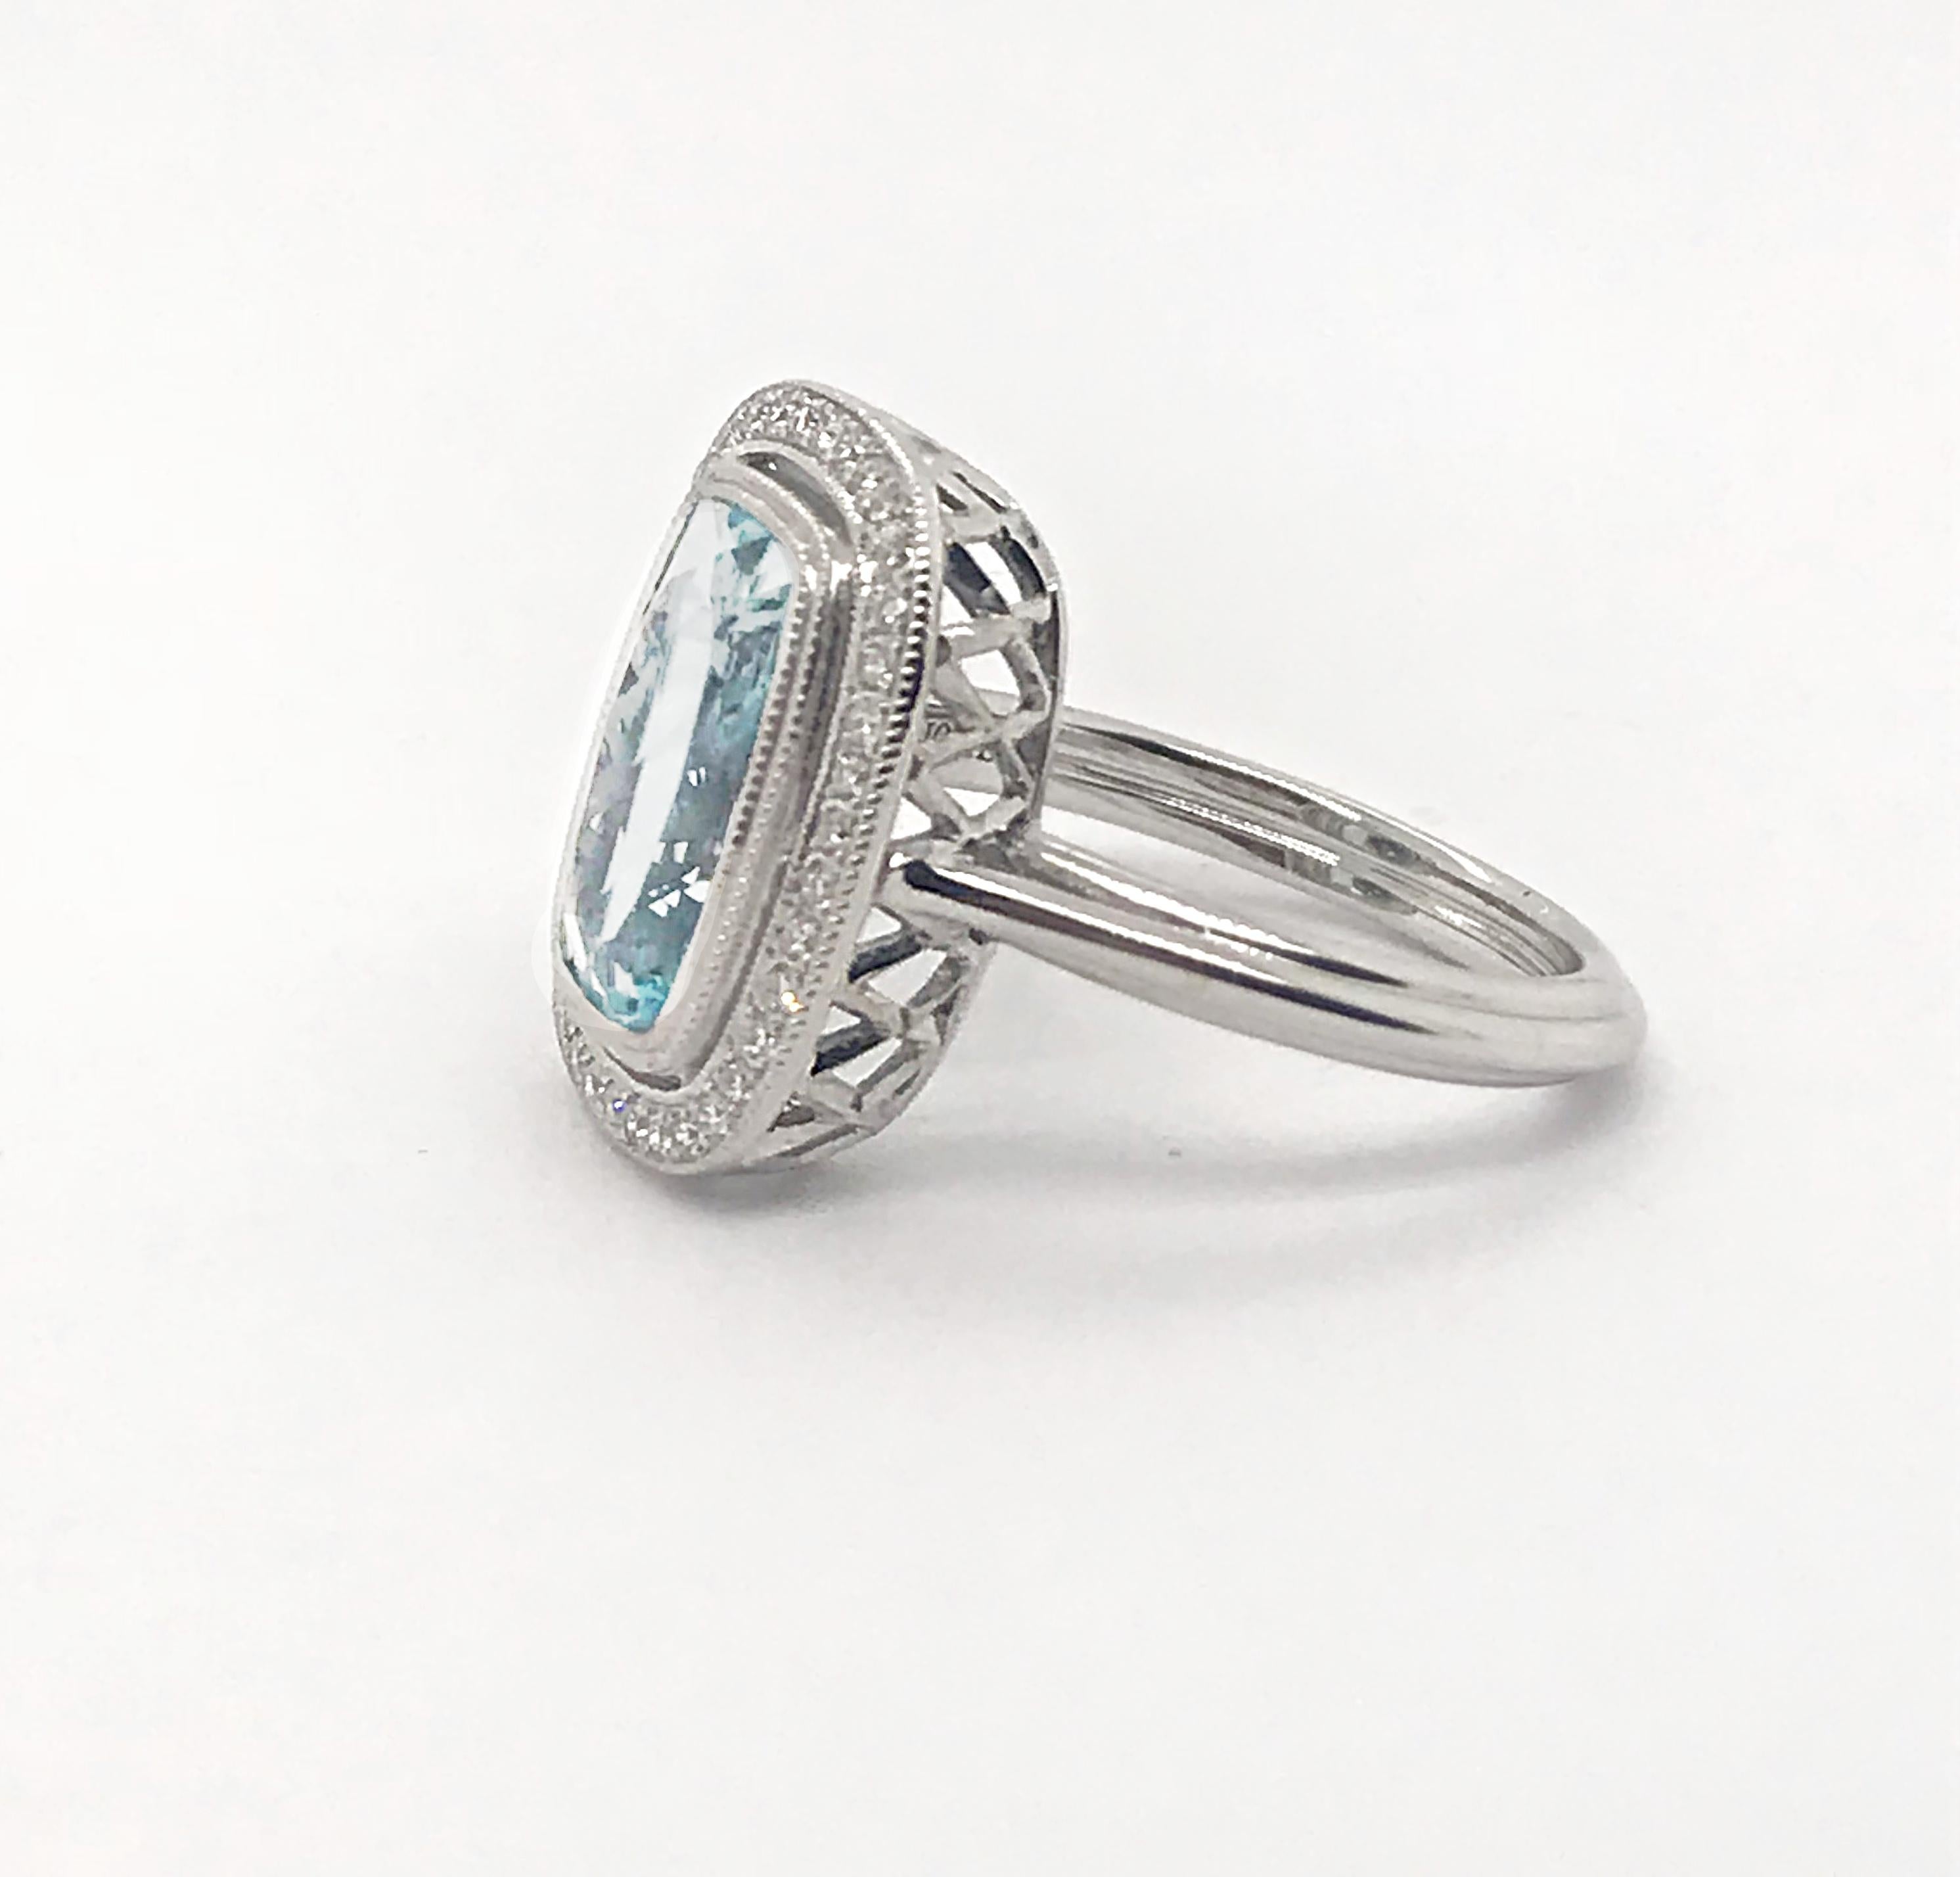 This exquisite Cushion Cut Aquamarine is 3.04 carats and set in this custom 14kt White Gold Setting. There are thirty-eight (38) round brilliant cut diamonds that total .19 carats. The setting is detailed with hand completed milgrain edge detail.  
